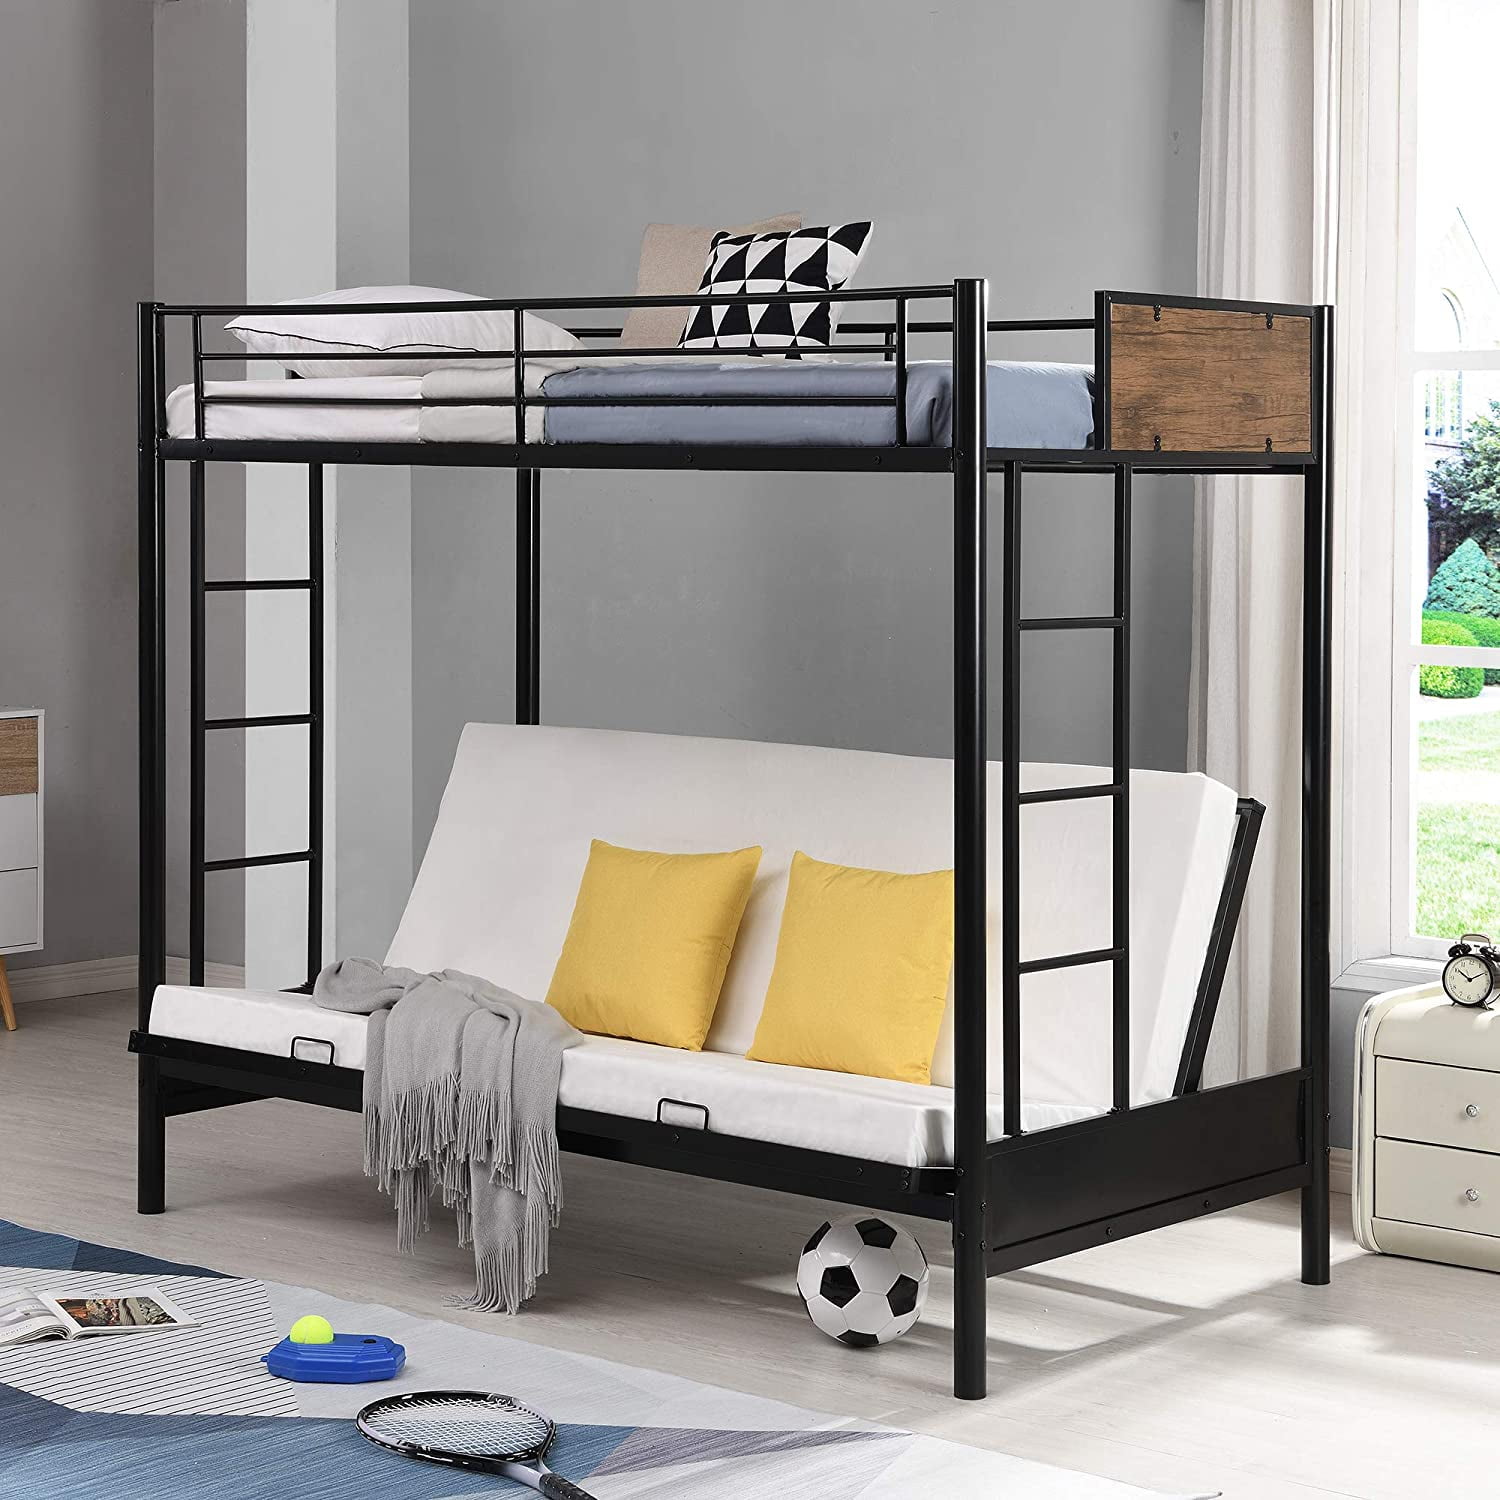 Piscis Convertible Twin Over Futon Bed, Full Over Full Futon Bunk Bed